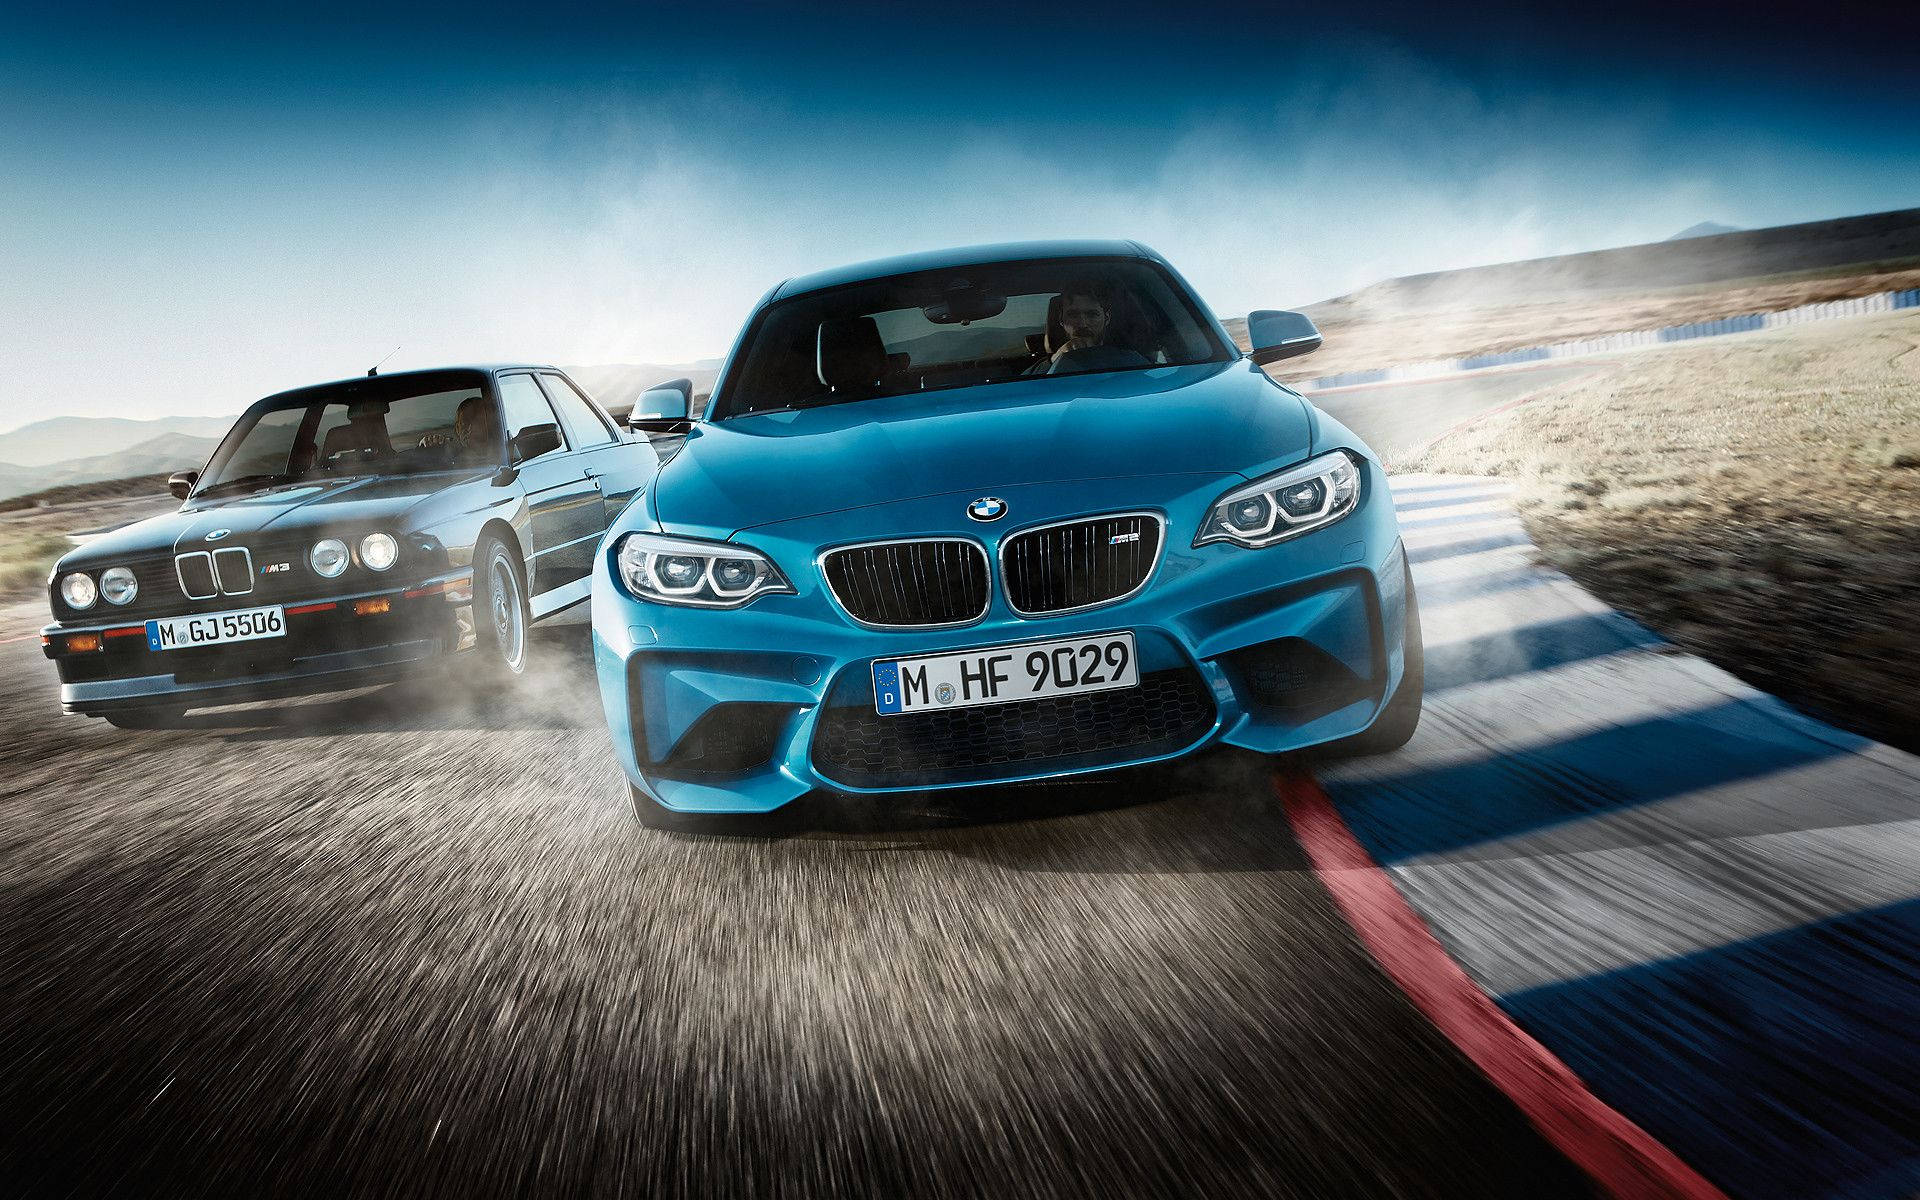 Comparing the BMW M2 and M3 Wallpaper